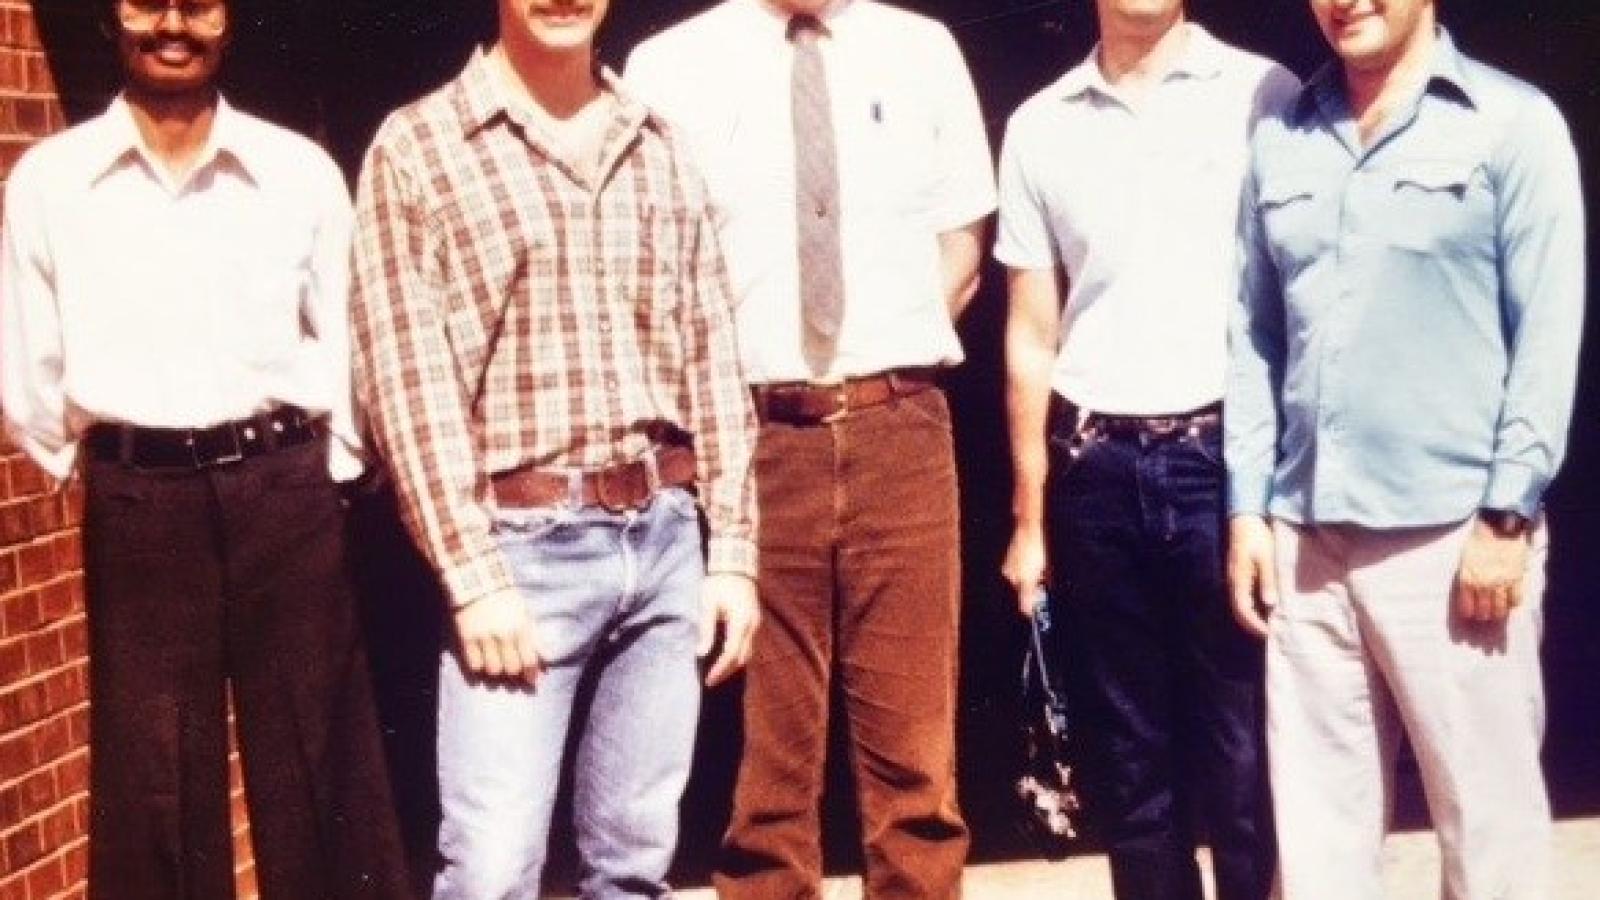 Dr. Robertson's research group in 1982